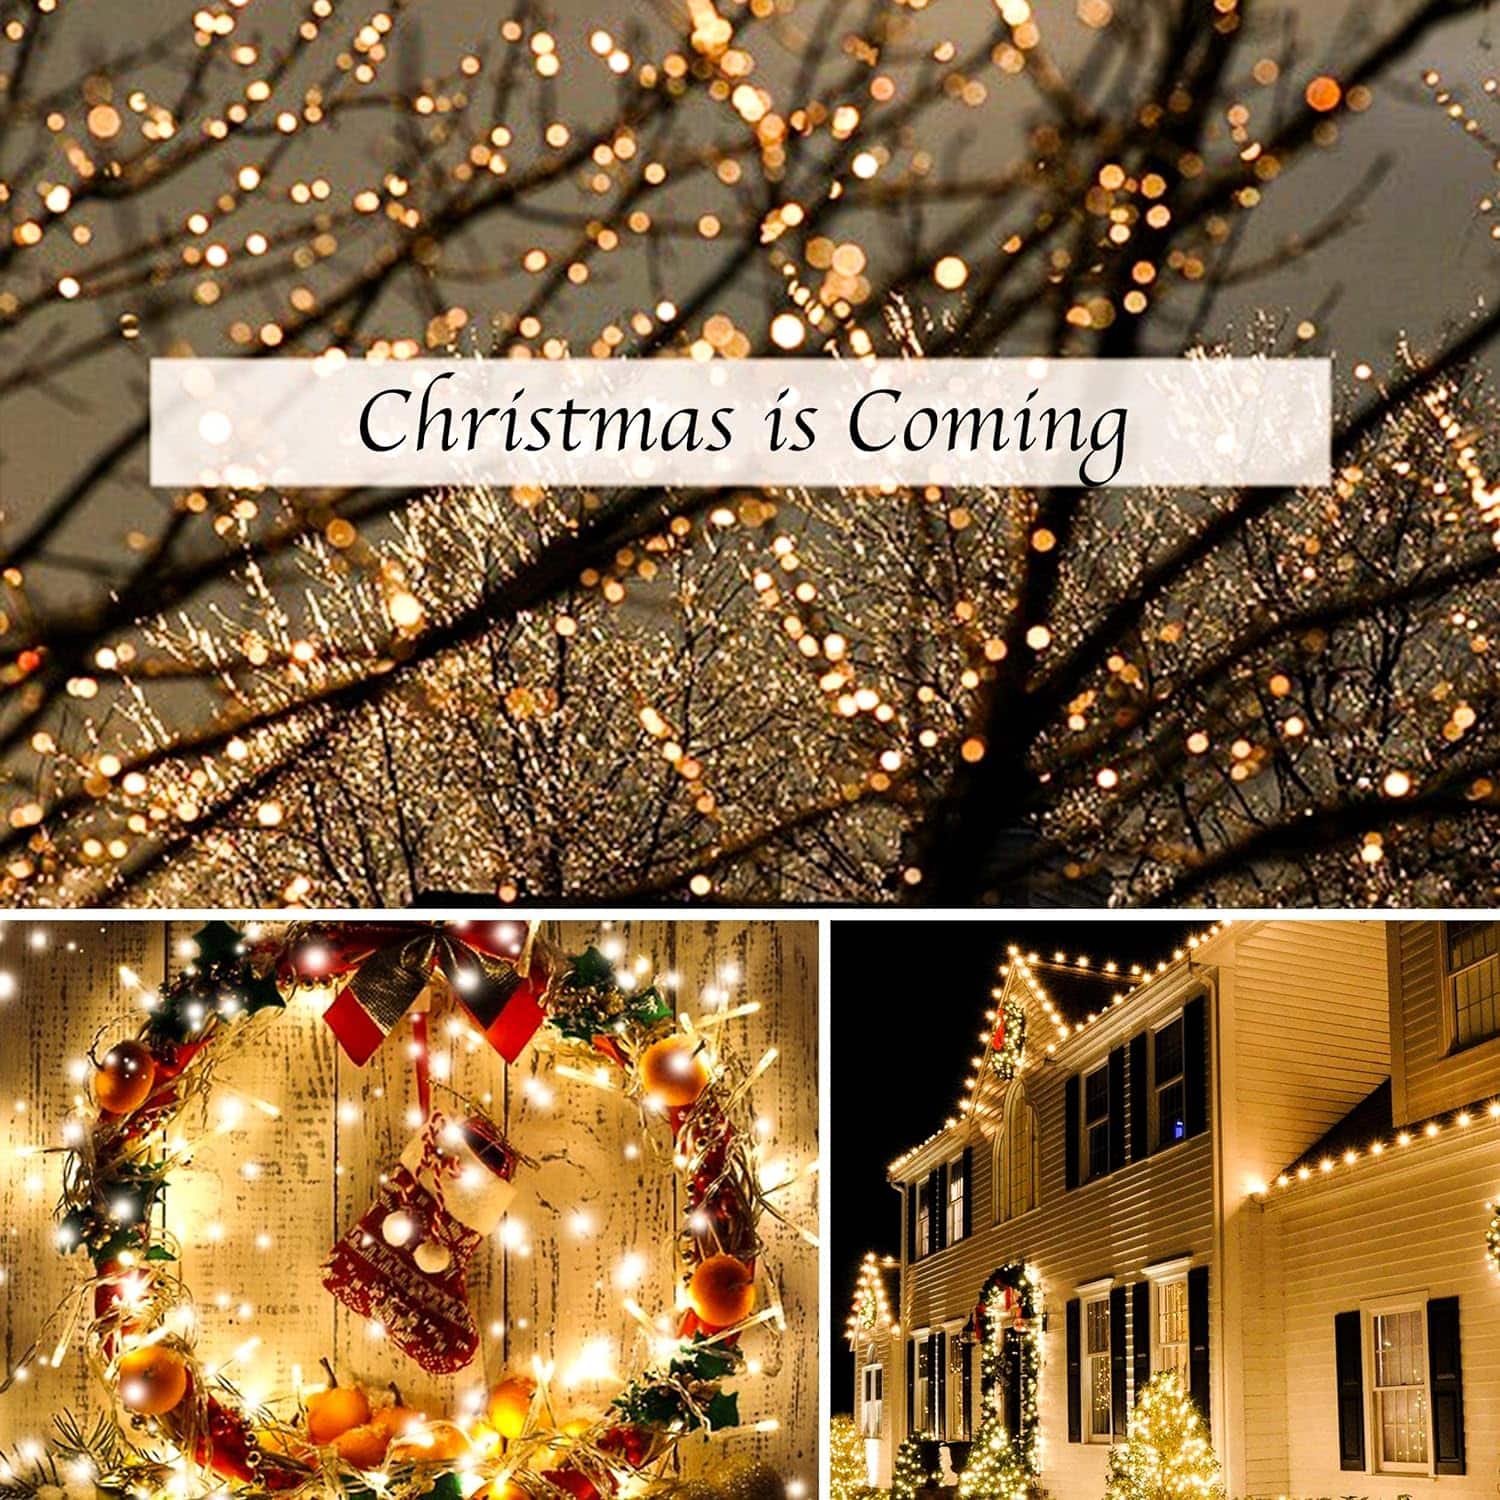 LED String Lights, 100 Warm White LED Christmas Lights for Indoor Decoration, Tree, Party, Balcony, Outdoor, 49 ft Plug in String Light with Timer, Multifunction, Waterproof, Extendable to 500 LED